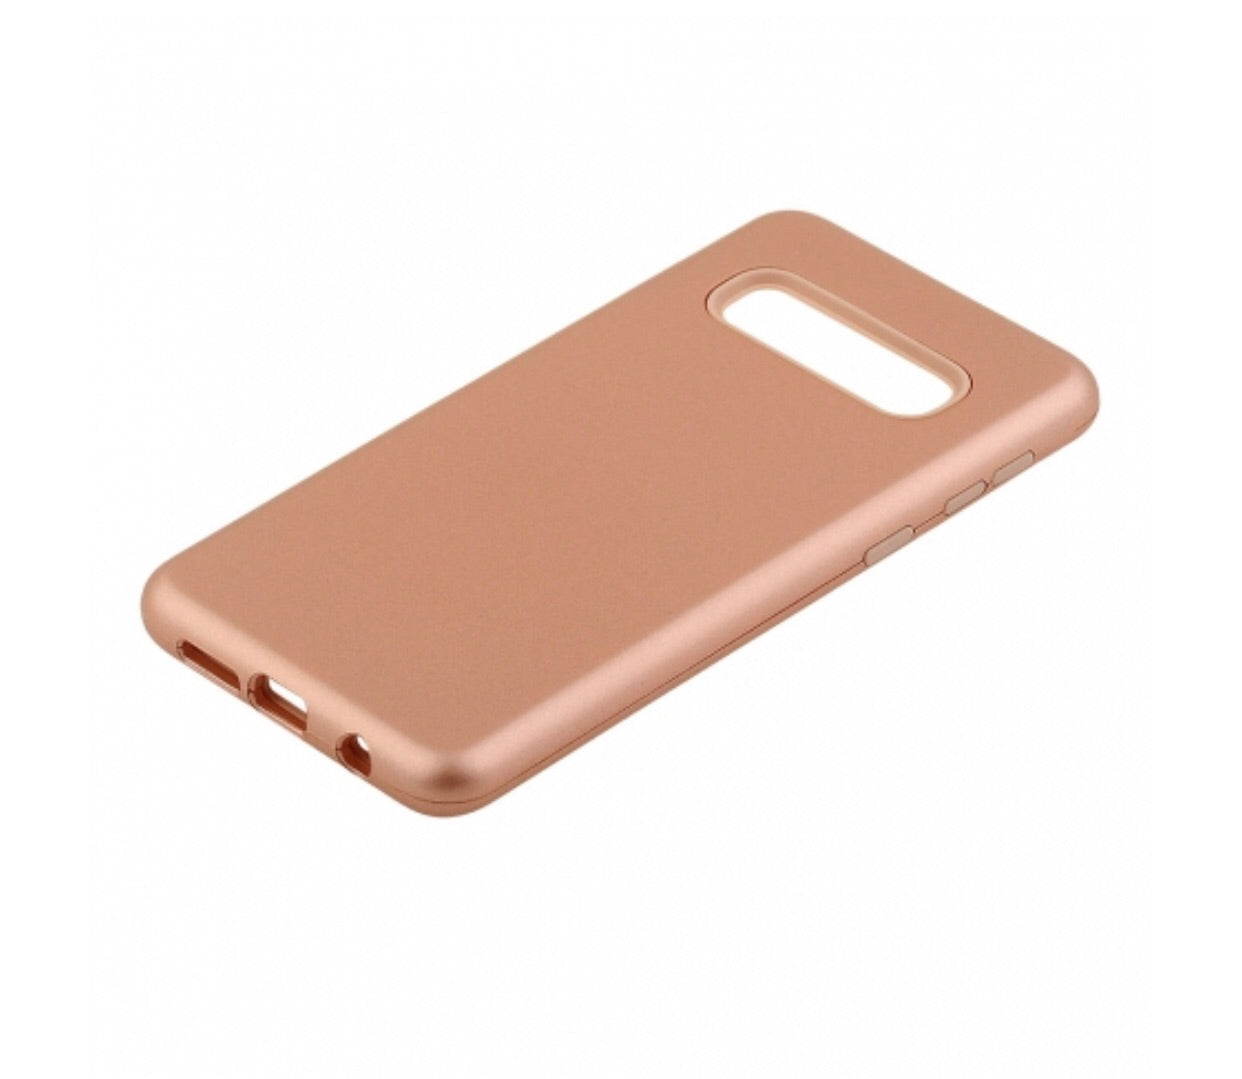 Samsung Galaxy S10 - Rose Gold Hard Plastic Cover with Rose Gold Soft Silicone Skin